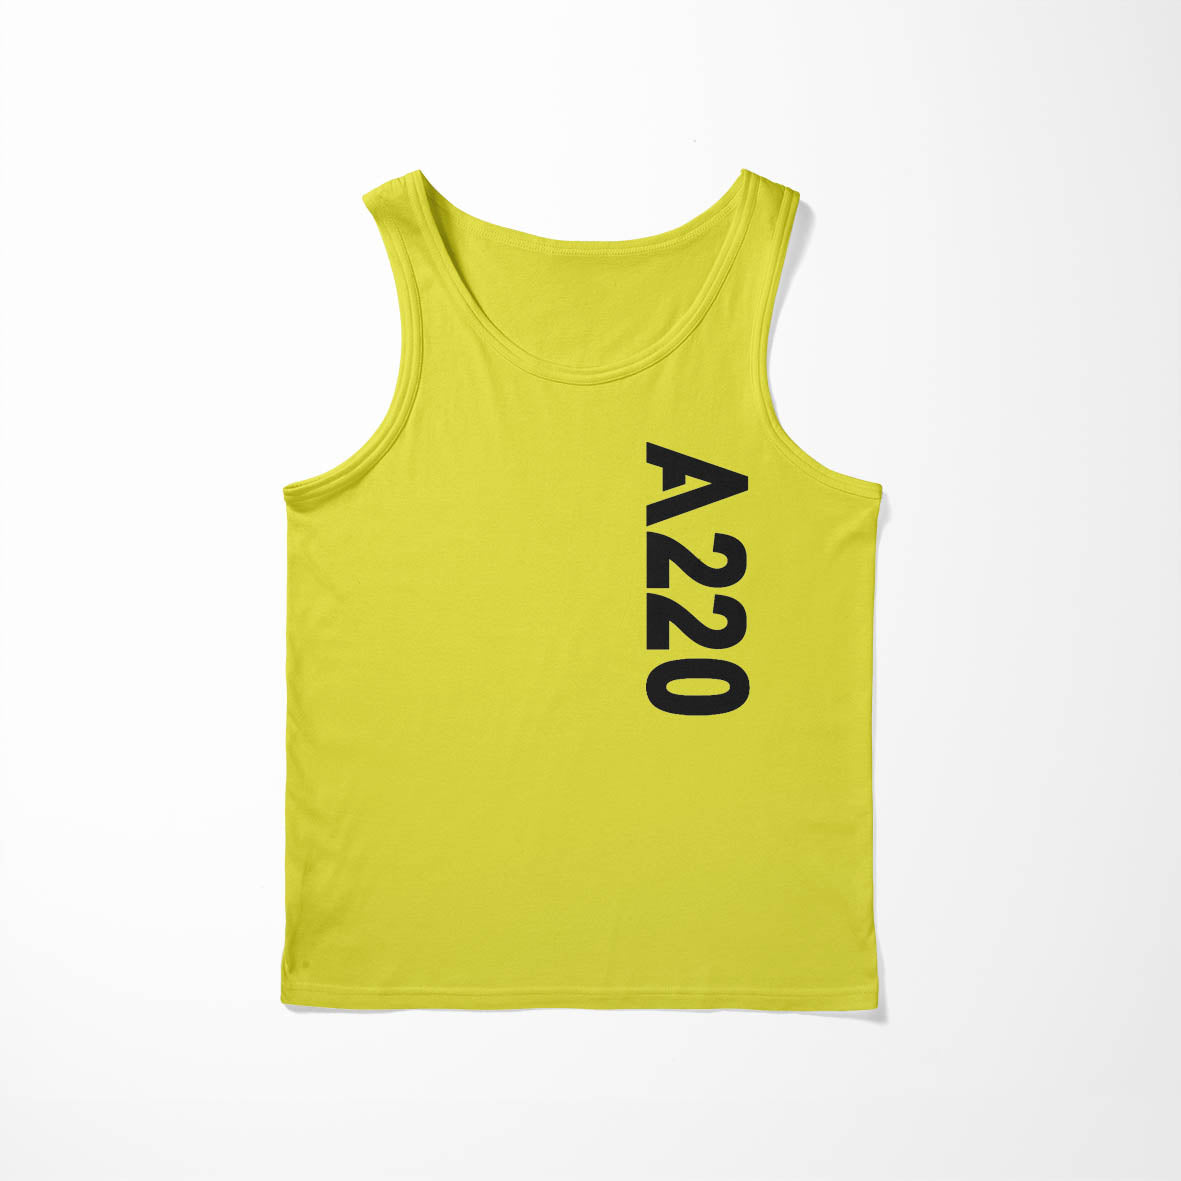 A220 Side Text Designed Tank Tops